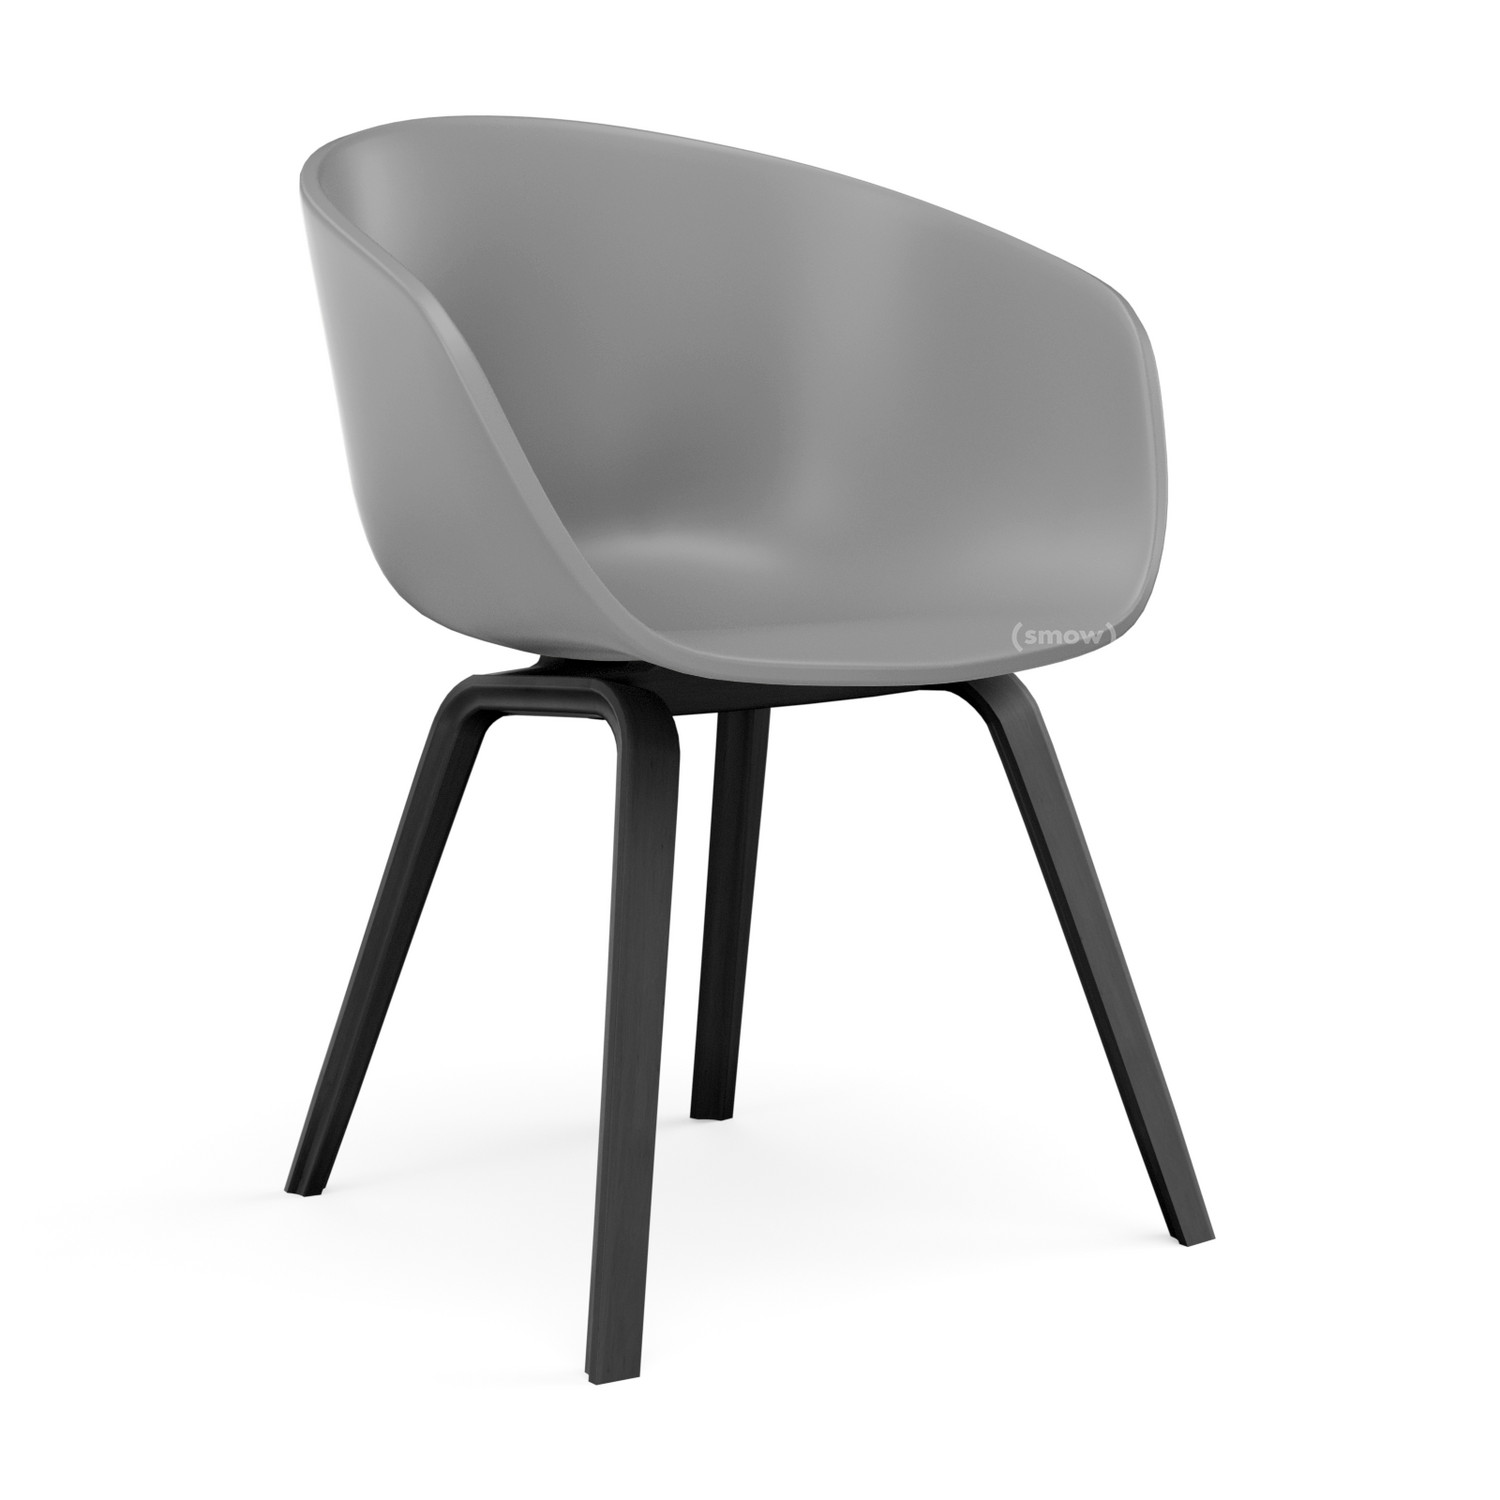 Meter Kolibrie Luiheid Hay About A Chair AAC 22, Concrete grey, Black lacquered oak by Hee Welling  & HAY, 2010 - Designer furniture by smow.com